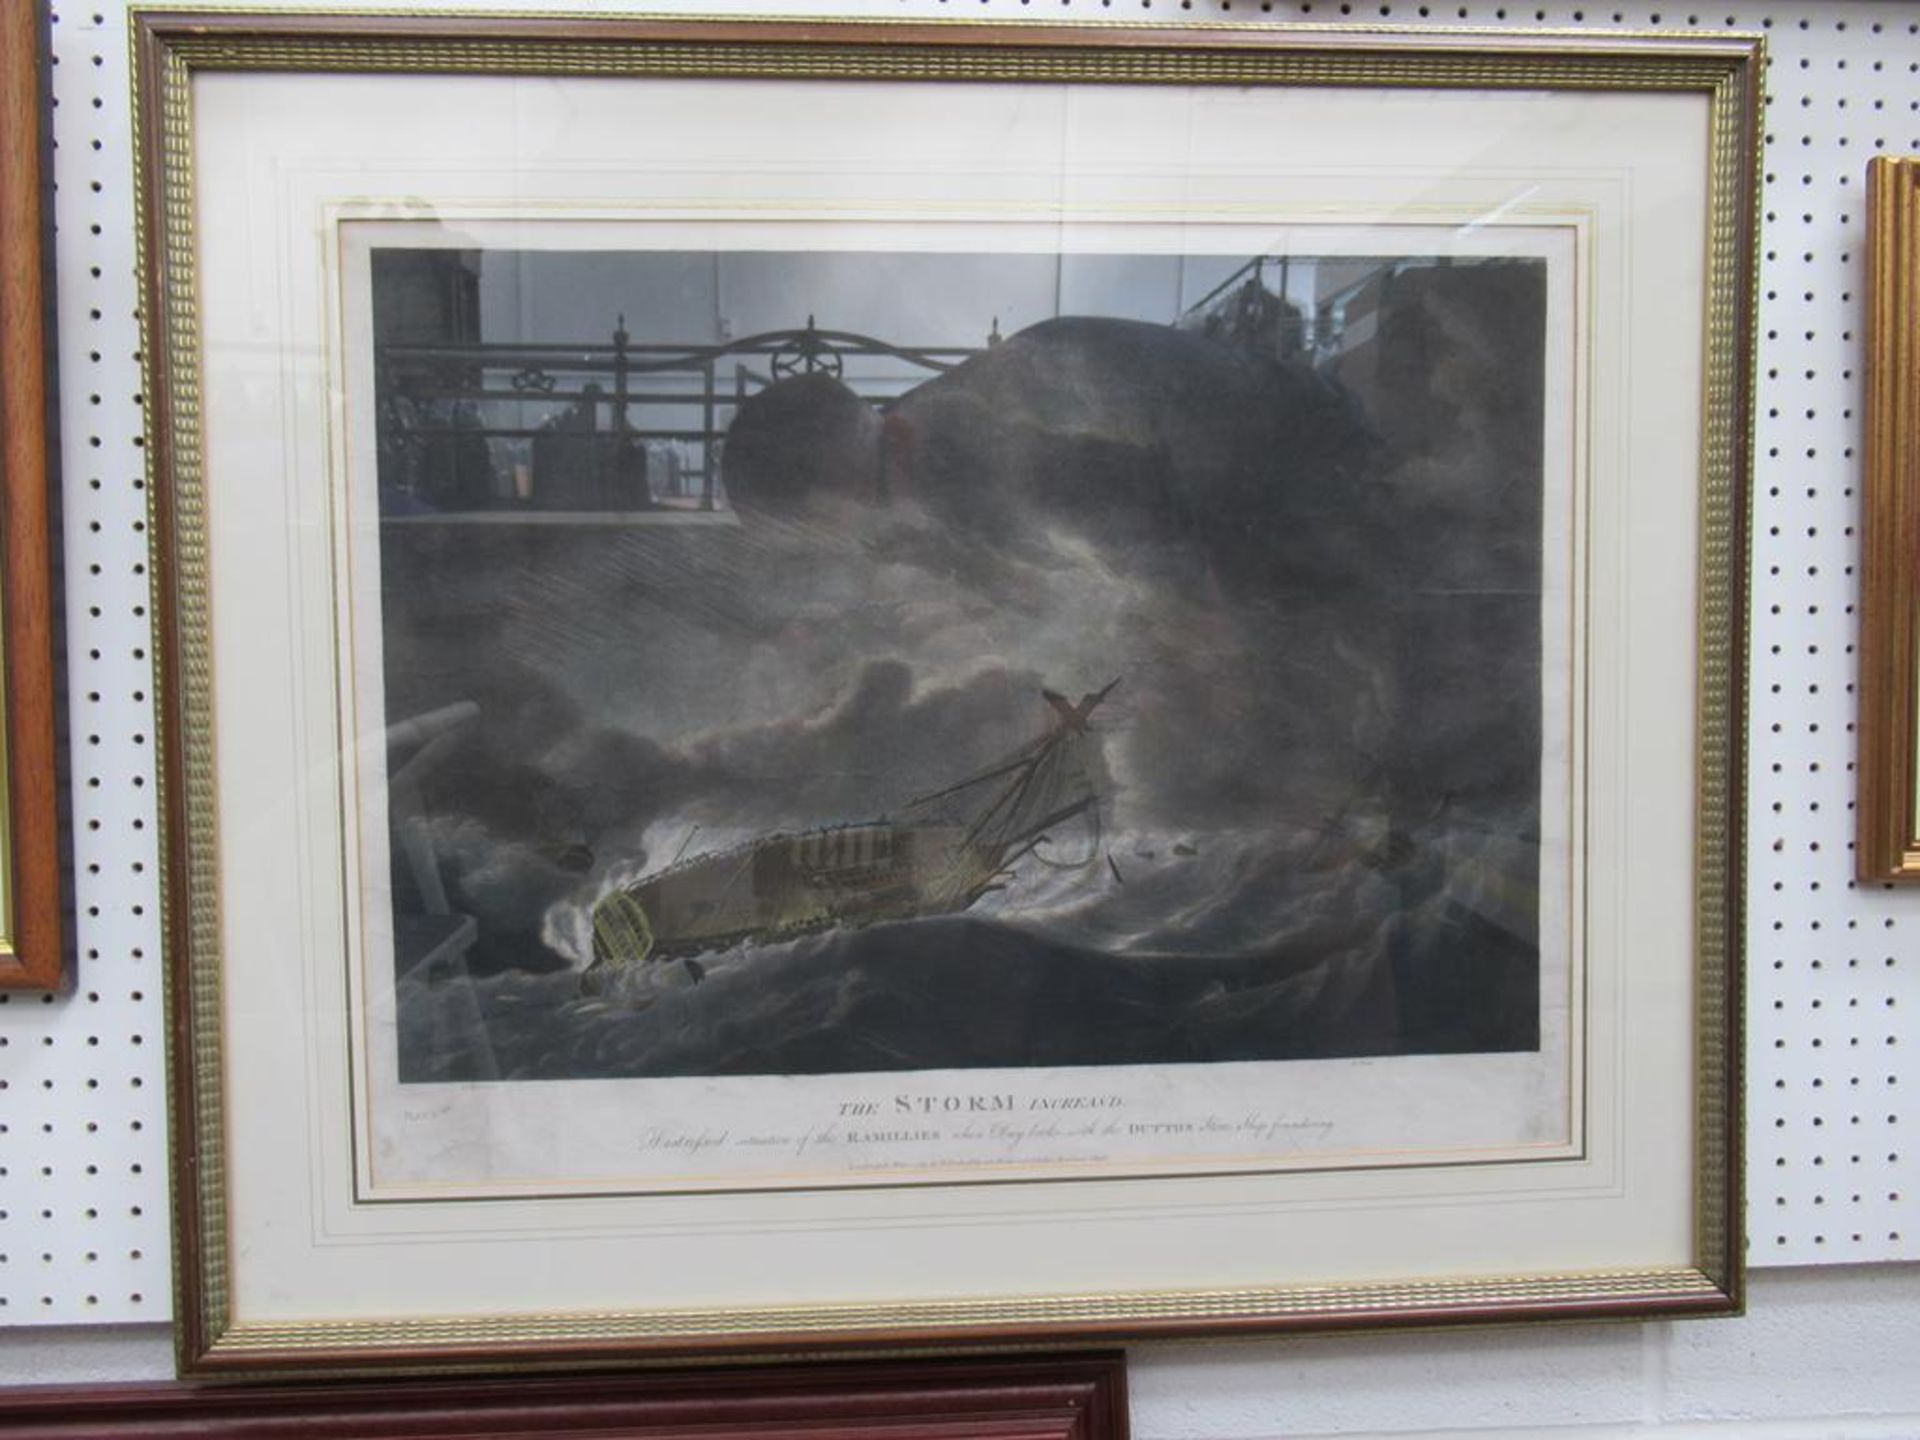 The Storm Increased' Print Framed behind Glass (52cm x 36cm) - Image 2 of 6